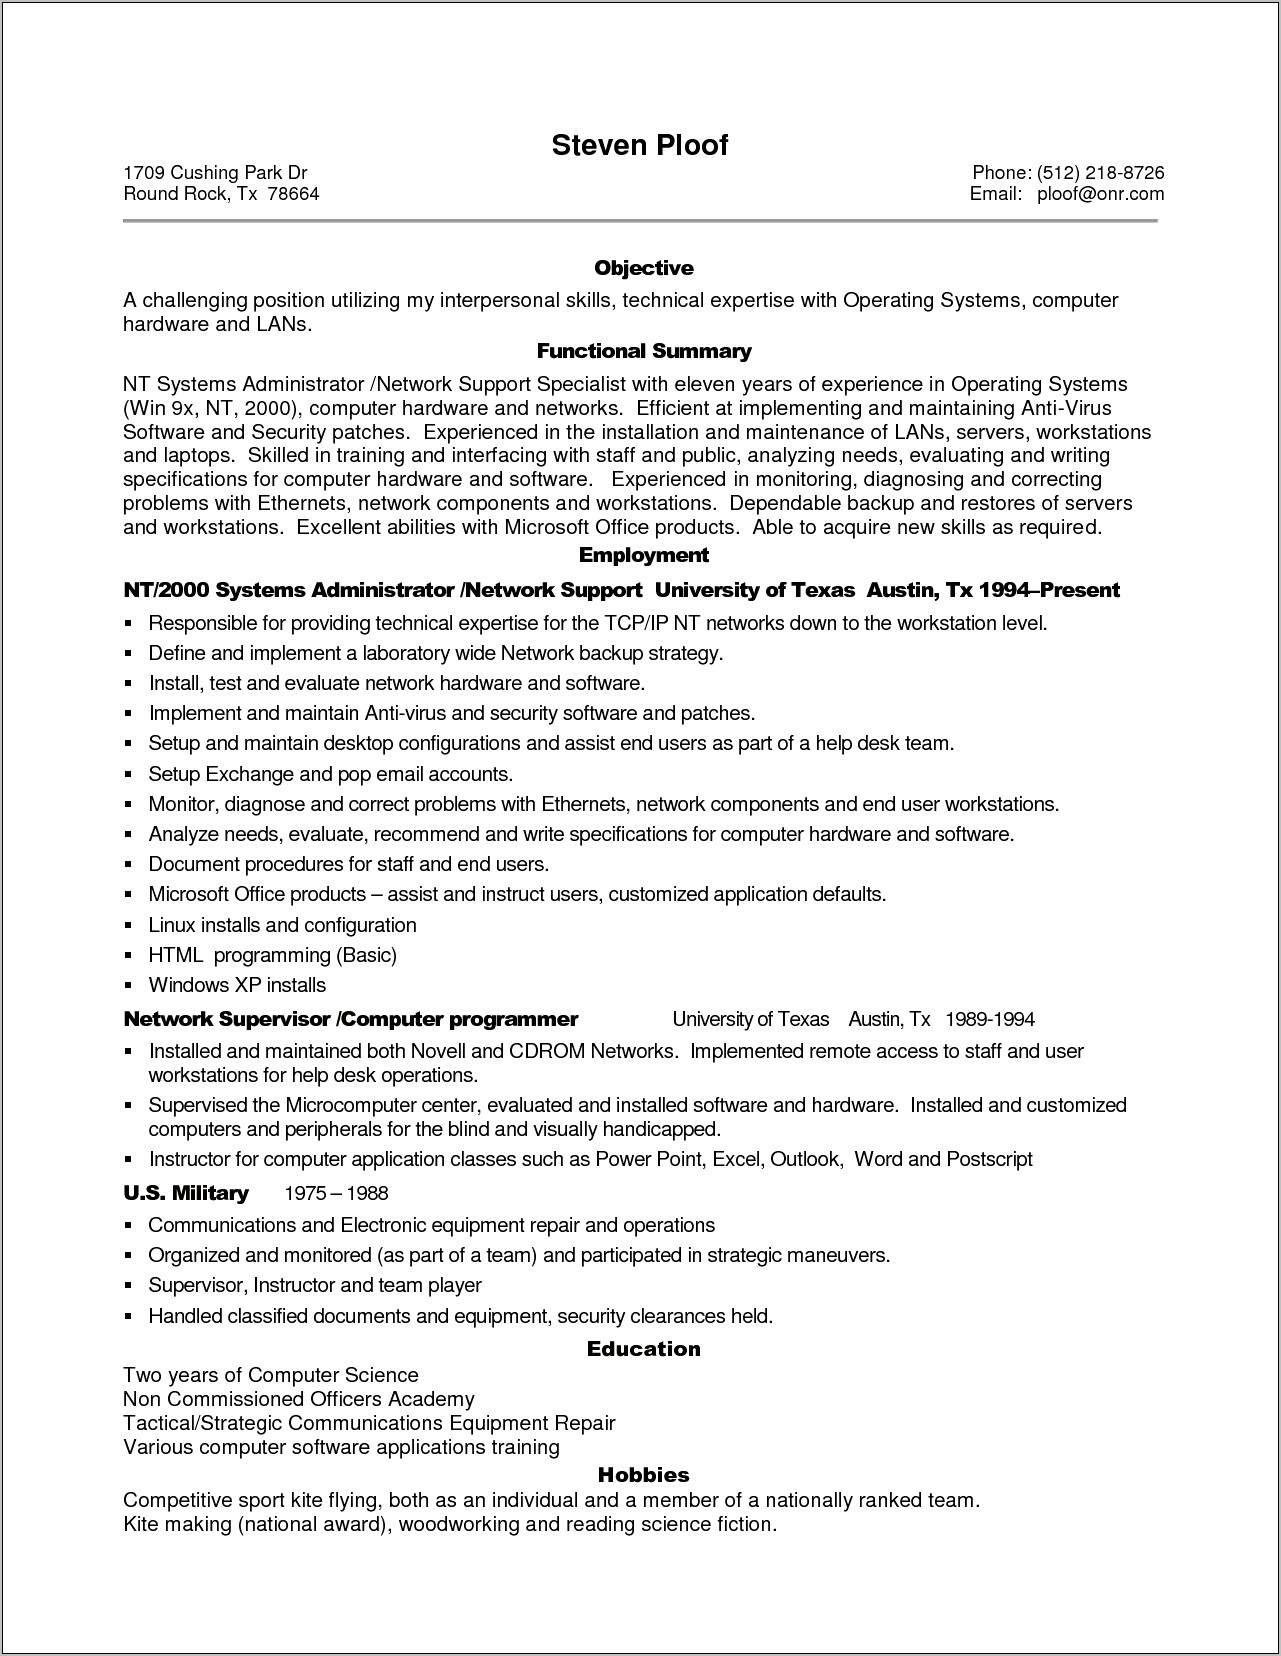 Sample Resume With Professional Experience